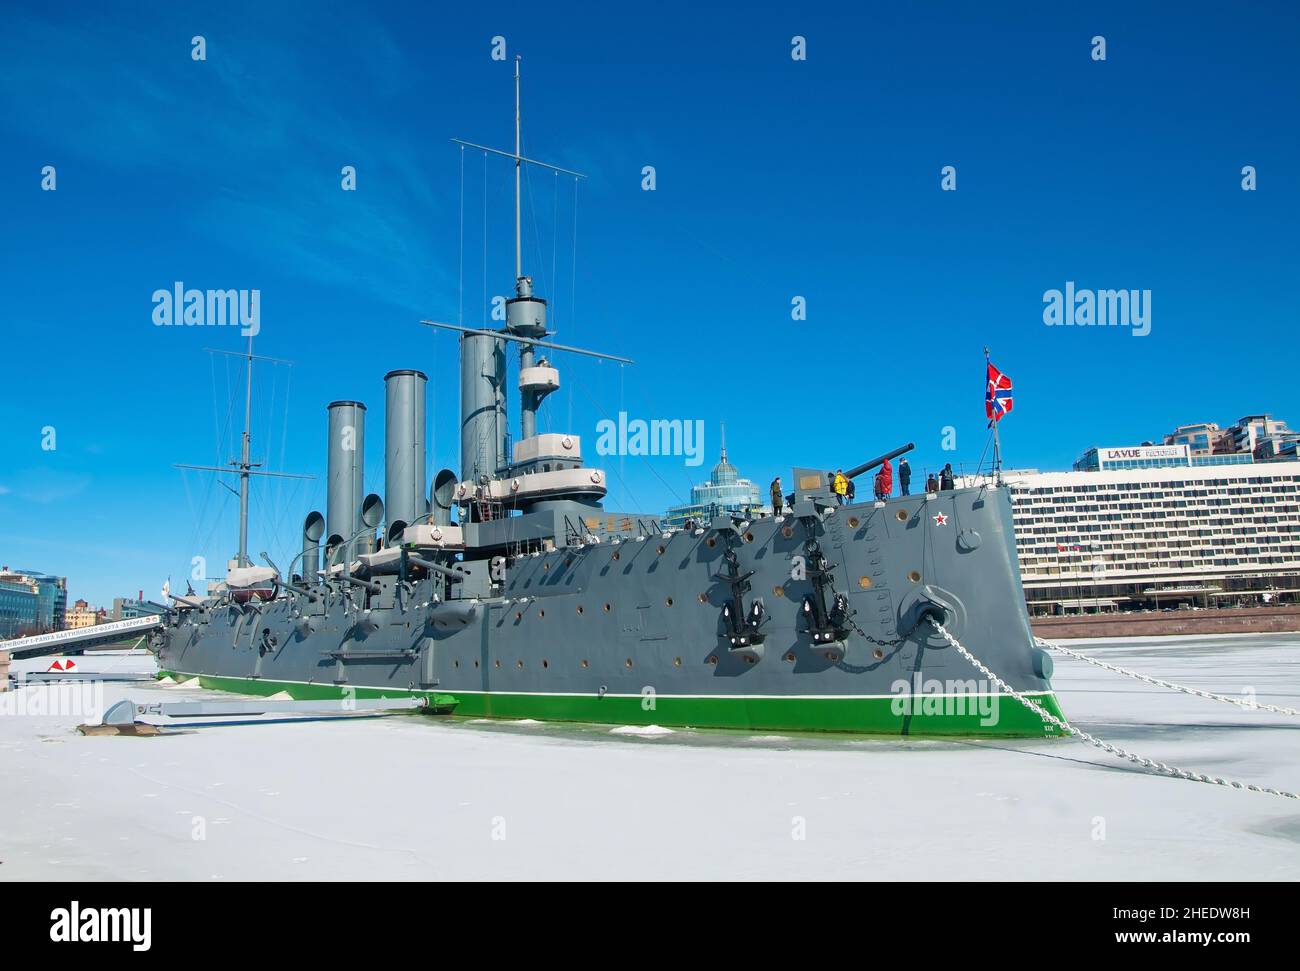 ST. PETERSBURG, RUSSIA - March 27 , 2021: Aurora cruiser, the symbol of the October revolution Stock Photo